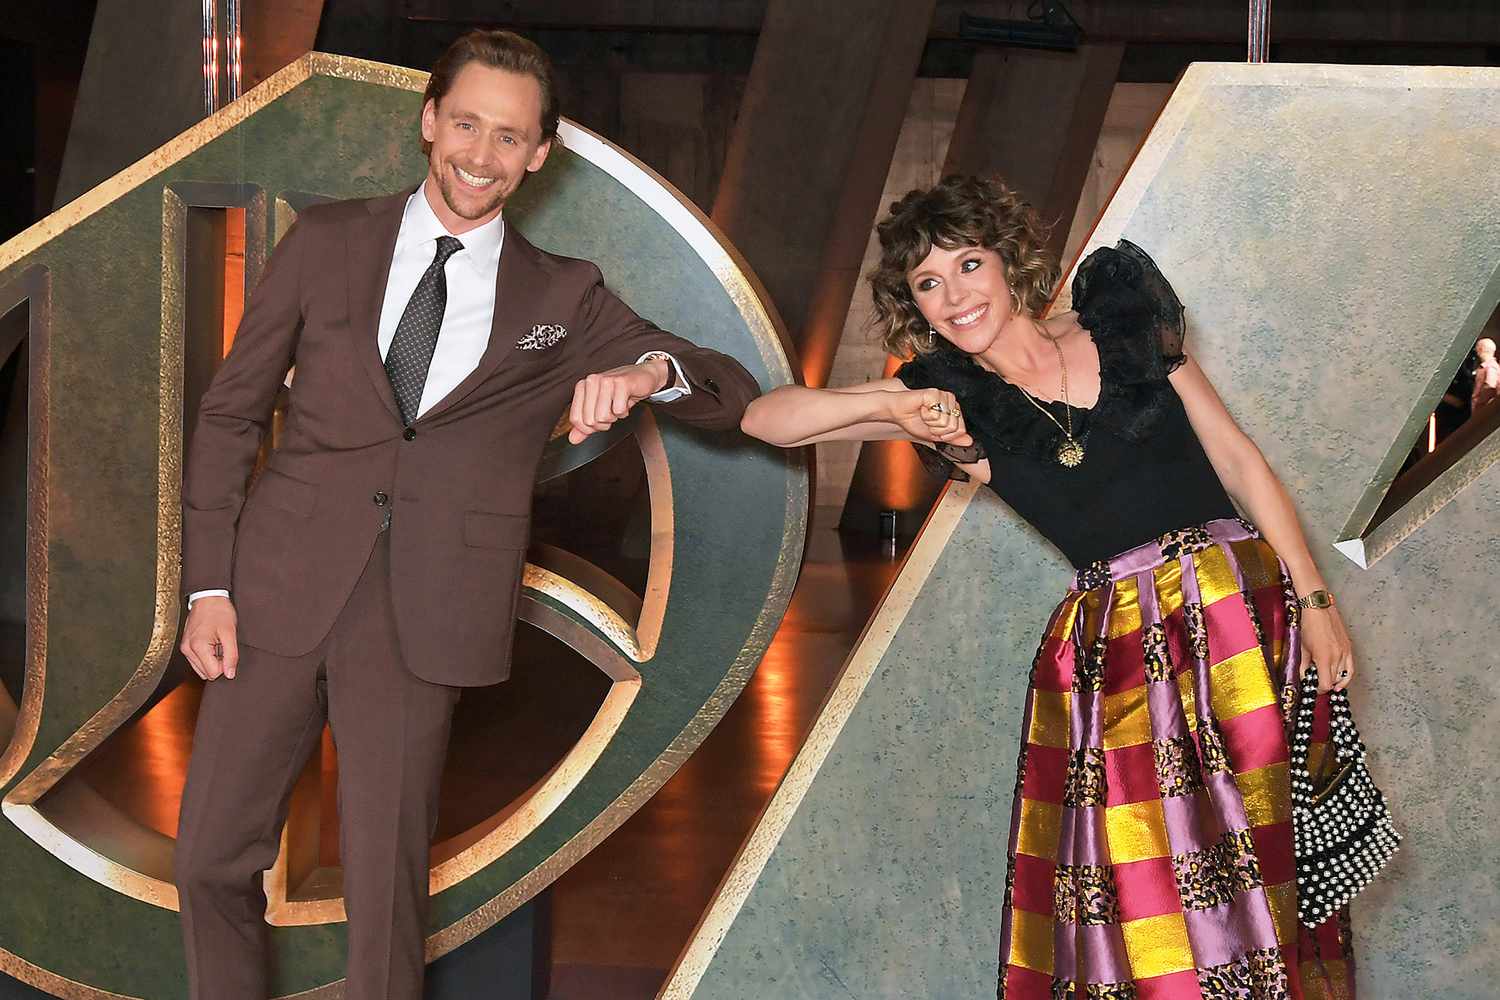 Tom Hiddleston and Sophia Di Martino attend a special preview screening of Marvel Studios "Loki" presented by Disney+ on June 8, 2021 in London